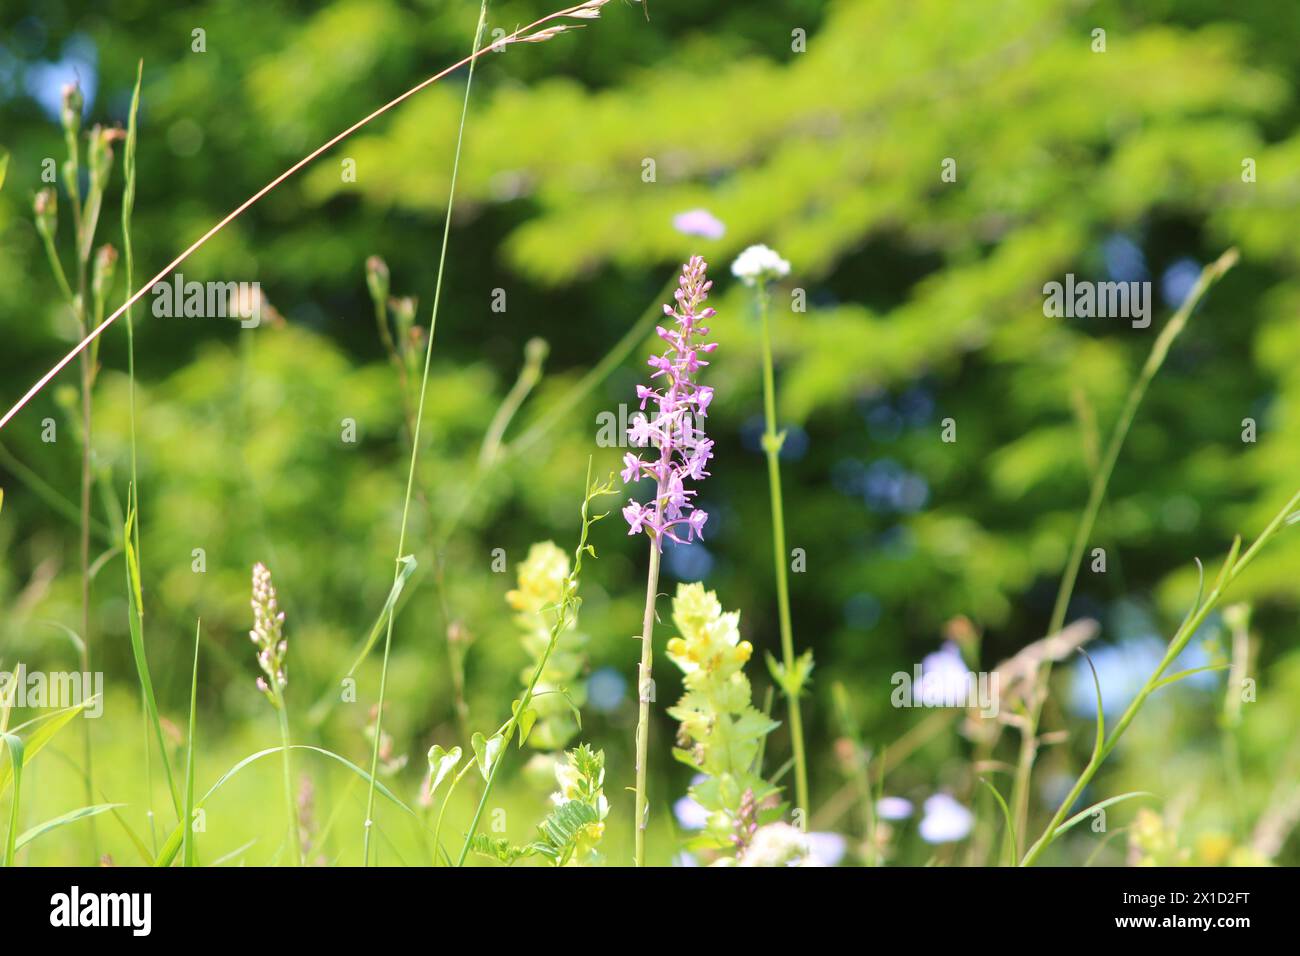 Wild fragant orchid (Gymnadenia conopsea) in a wildflower meadow against trees in bokeh, Kaiserstuhl, Germany Stock Photo